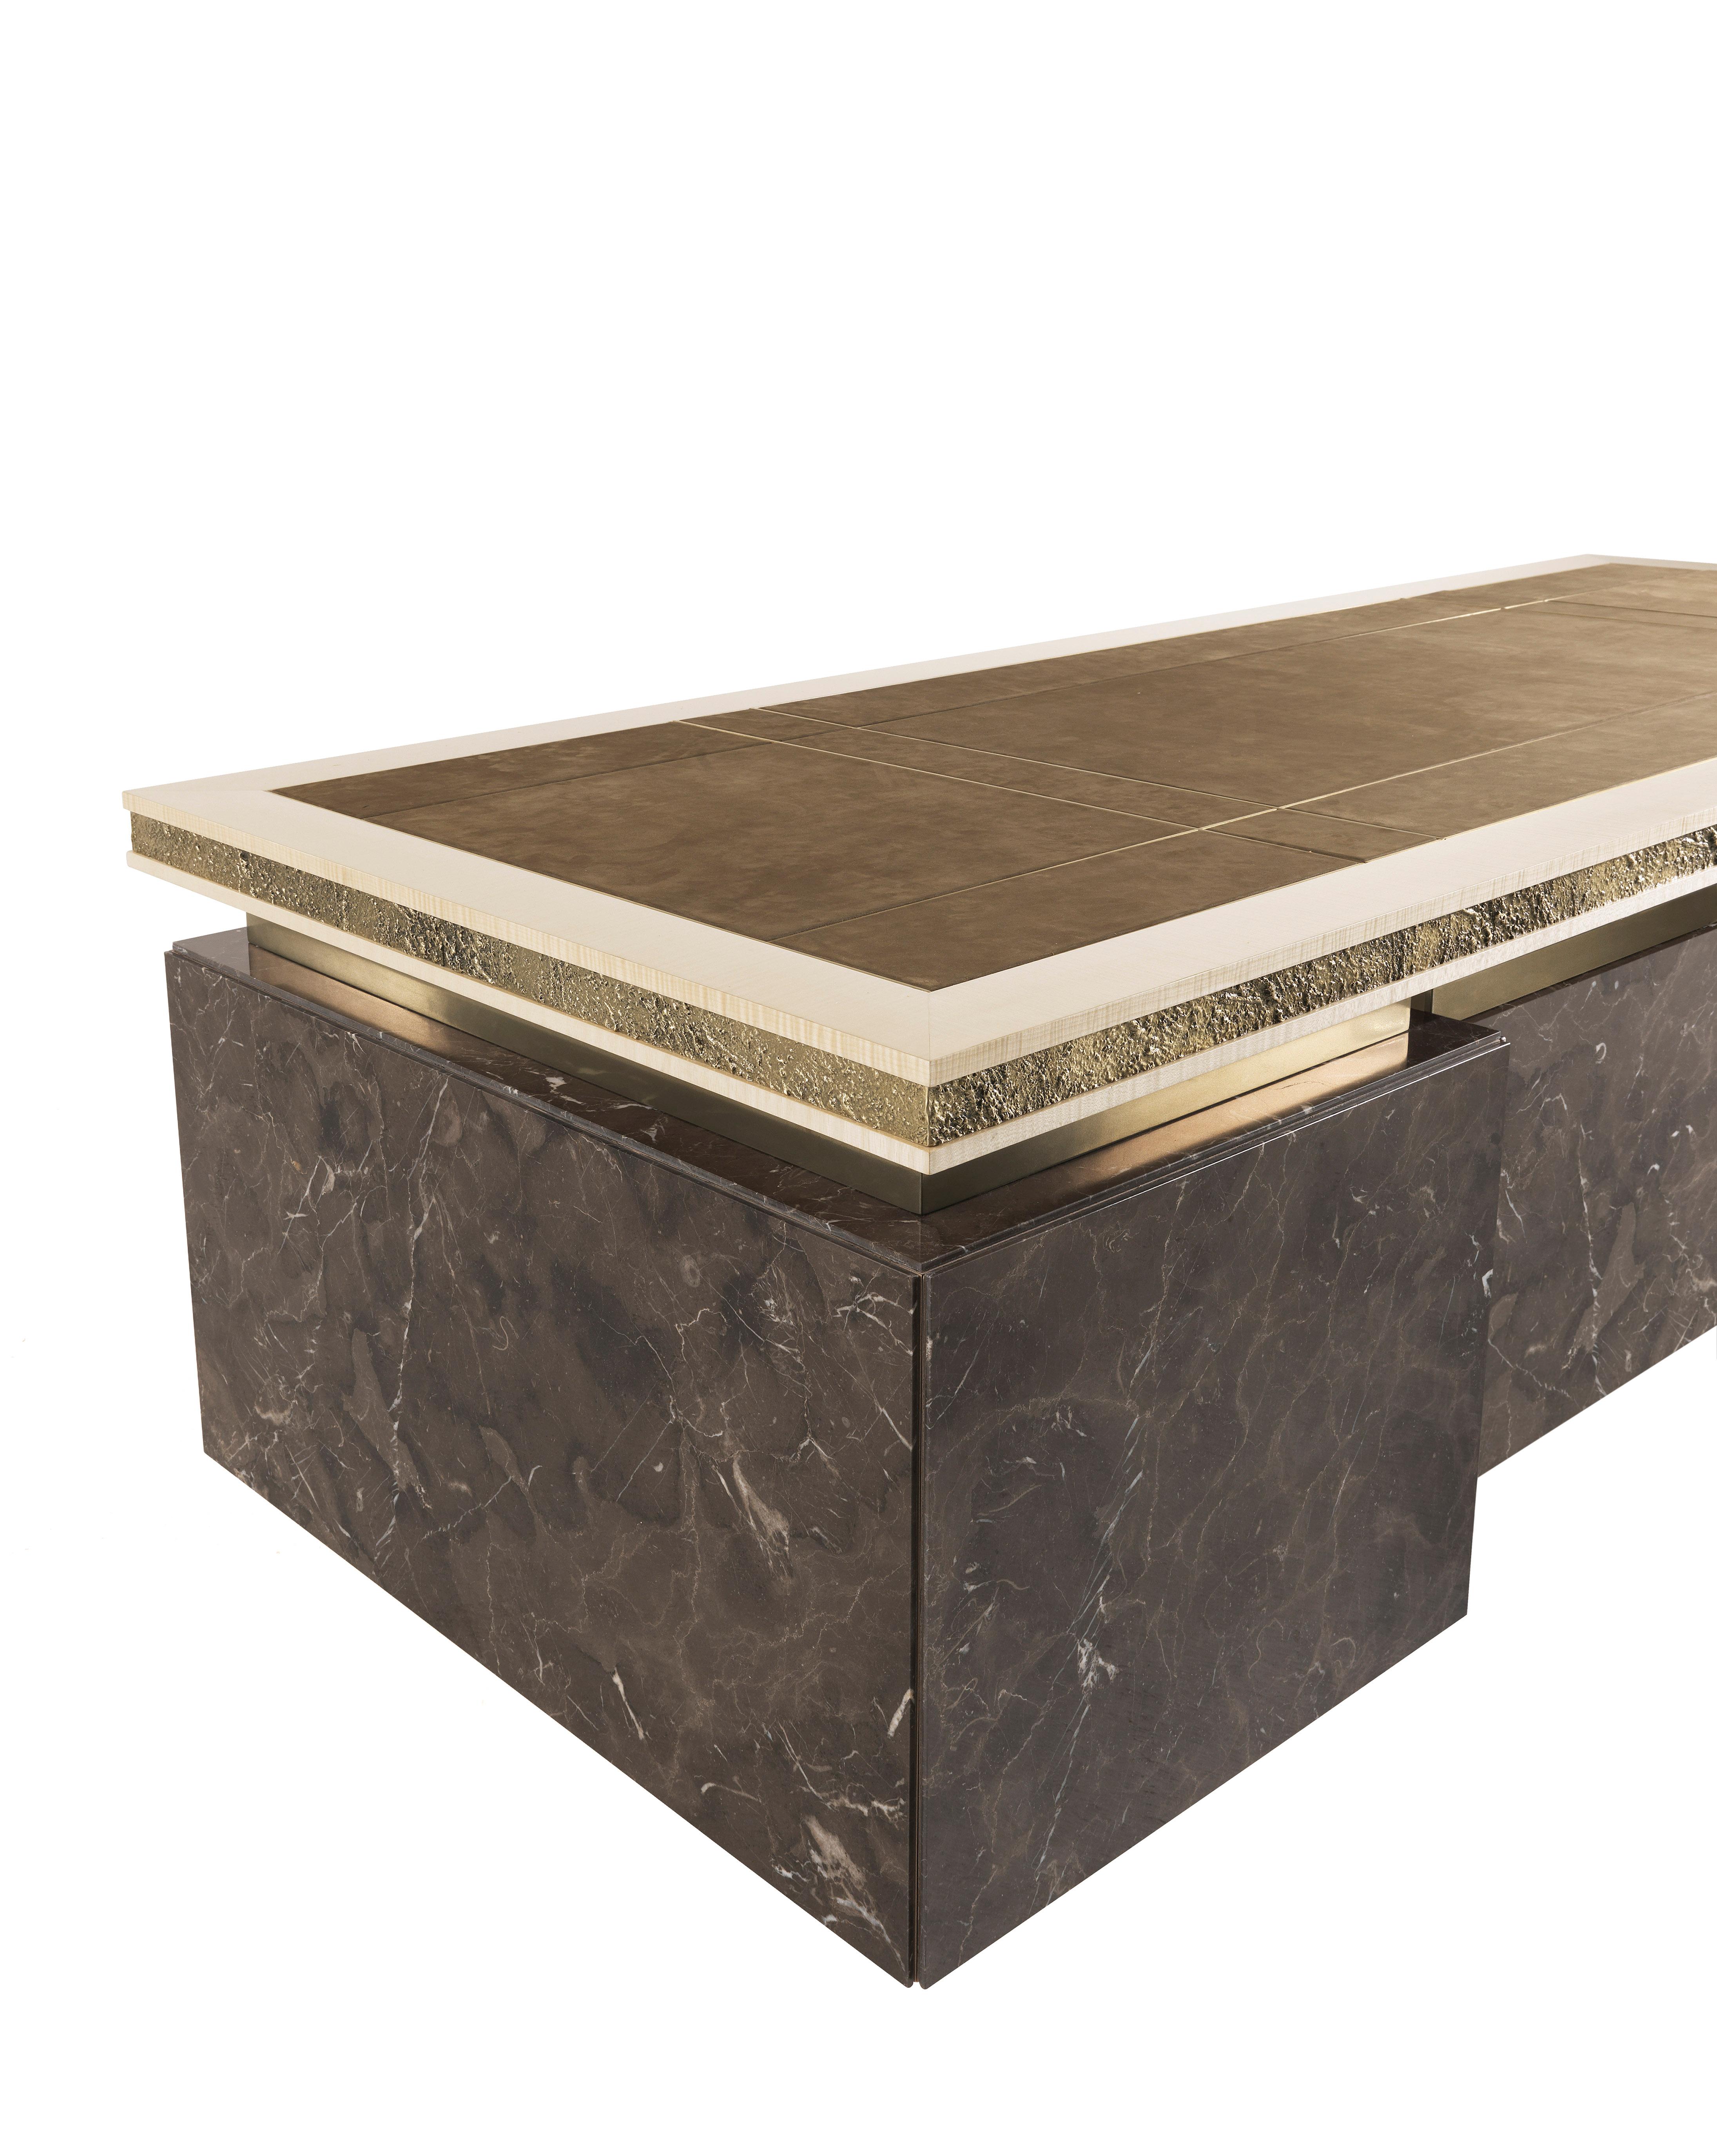 Contemporary 21st Century Shinto Writing Desk with Sculptural Bases in Lost-wax Cast Brass For Sale